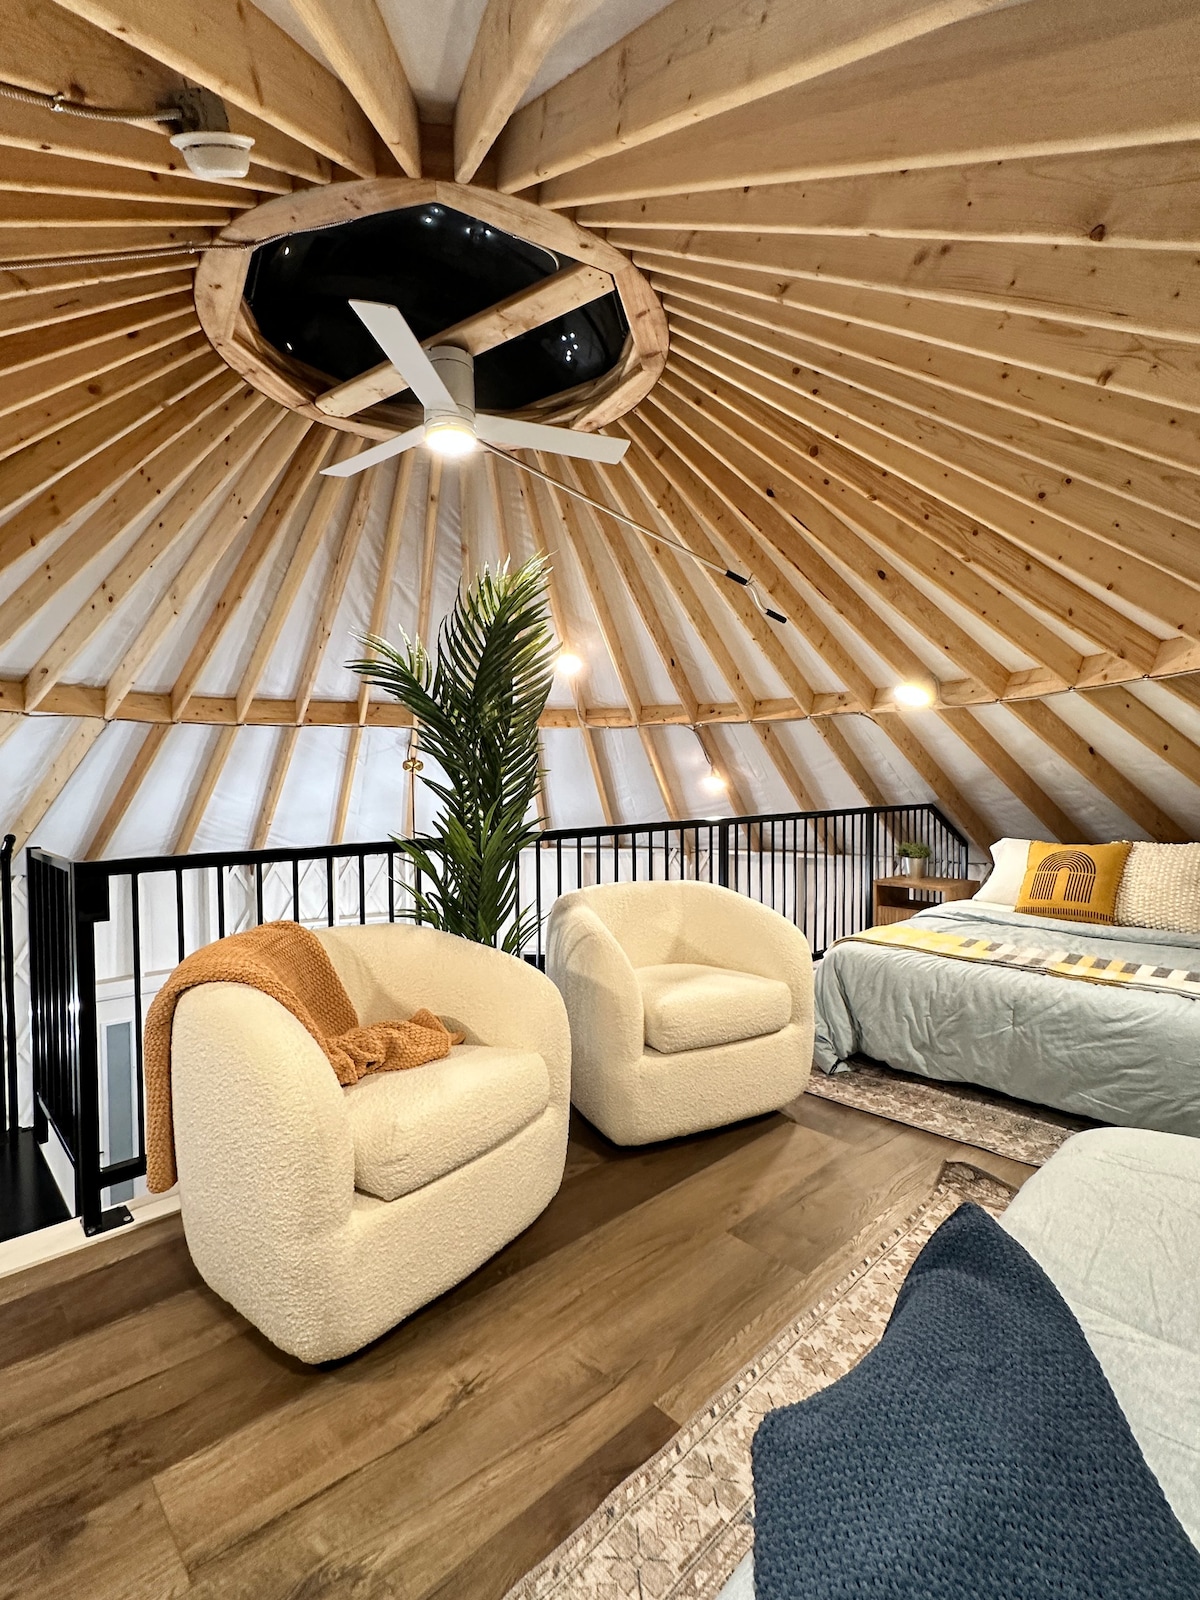 Dual Deluxe Yurts w/ Striking Views in Nature